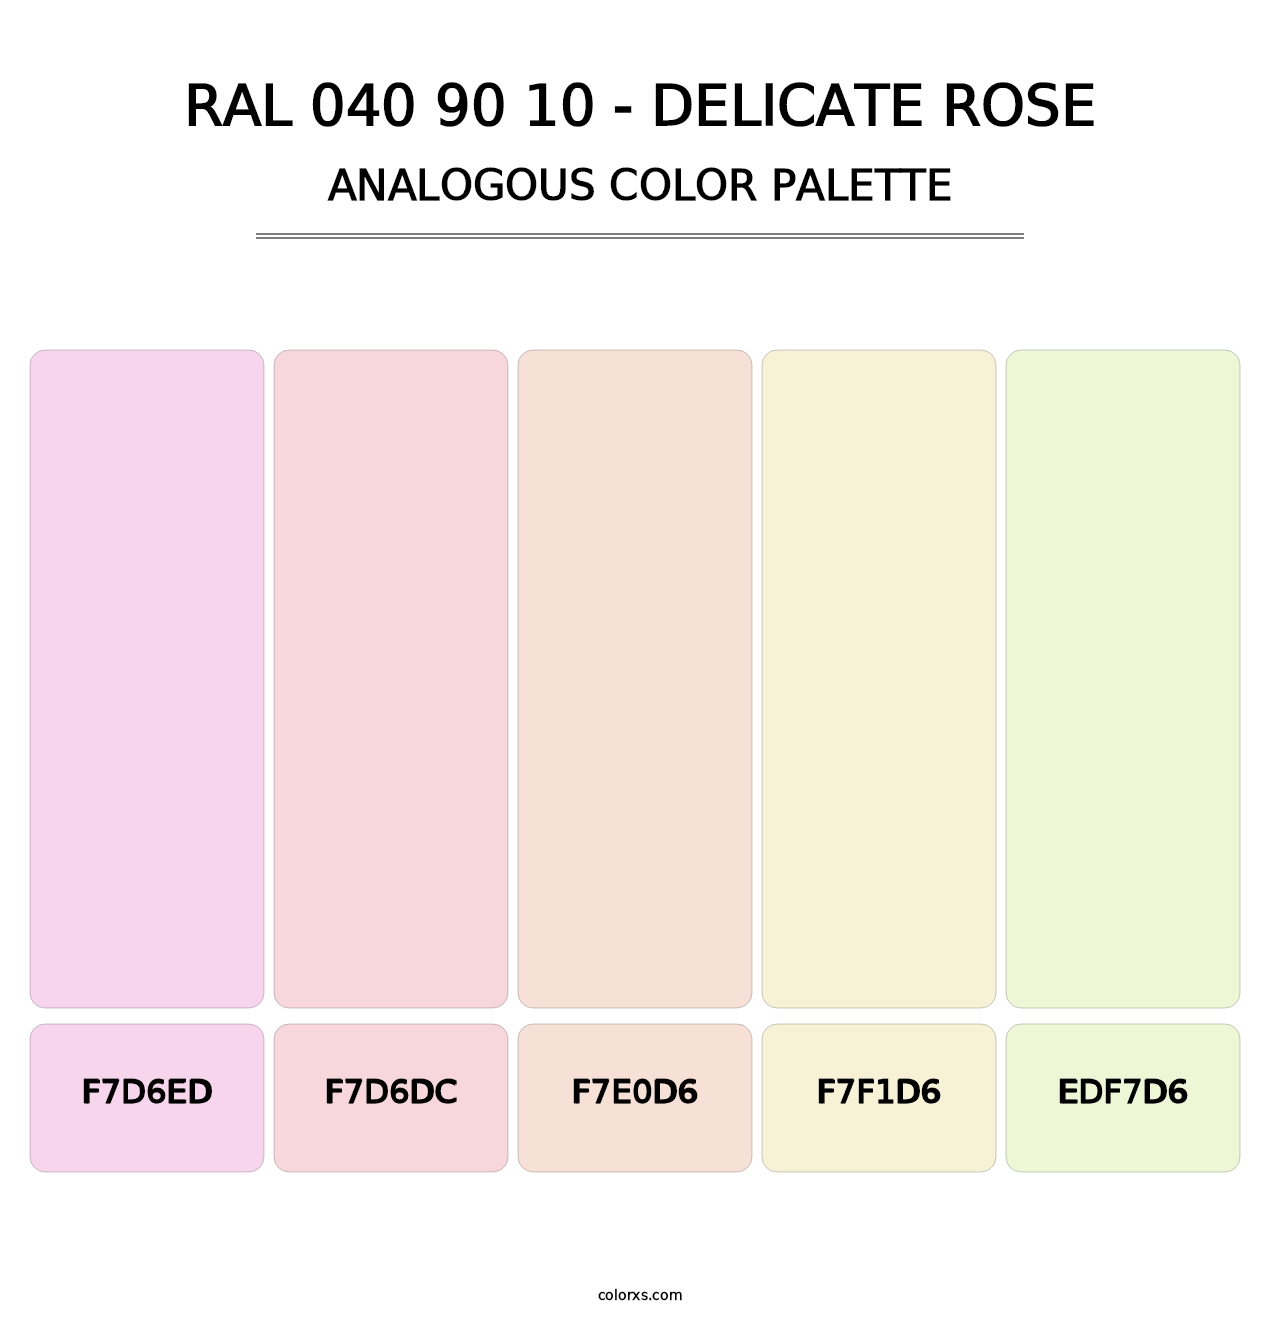 RAL 040 90 10 - Delicate Rose - Analogous Color Palette